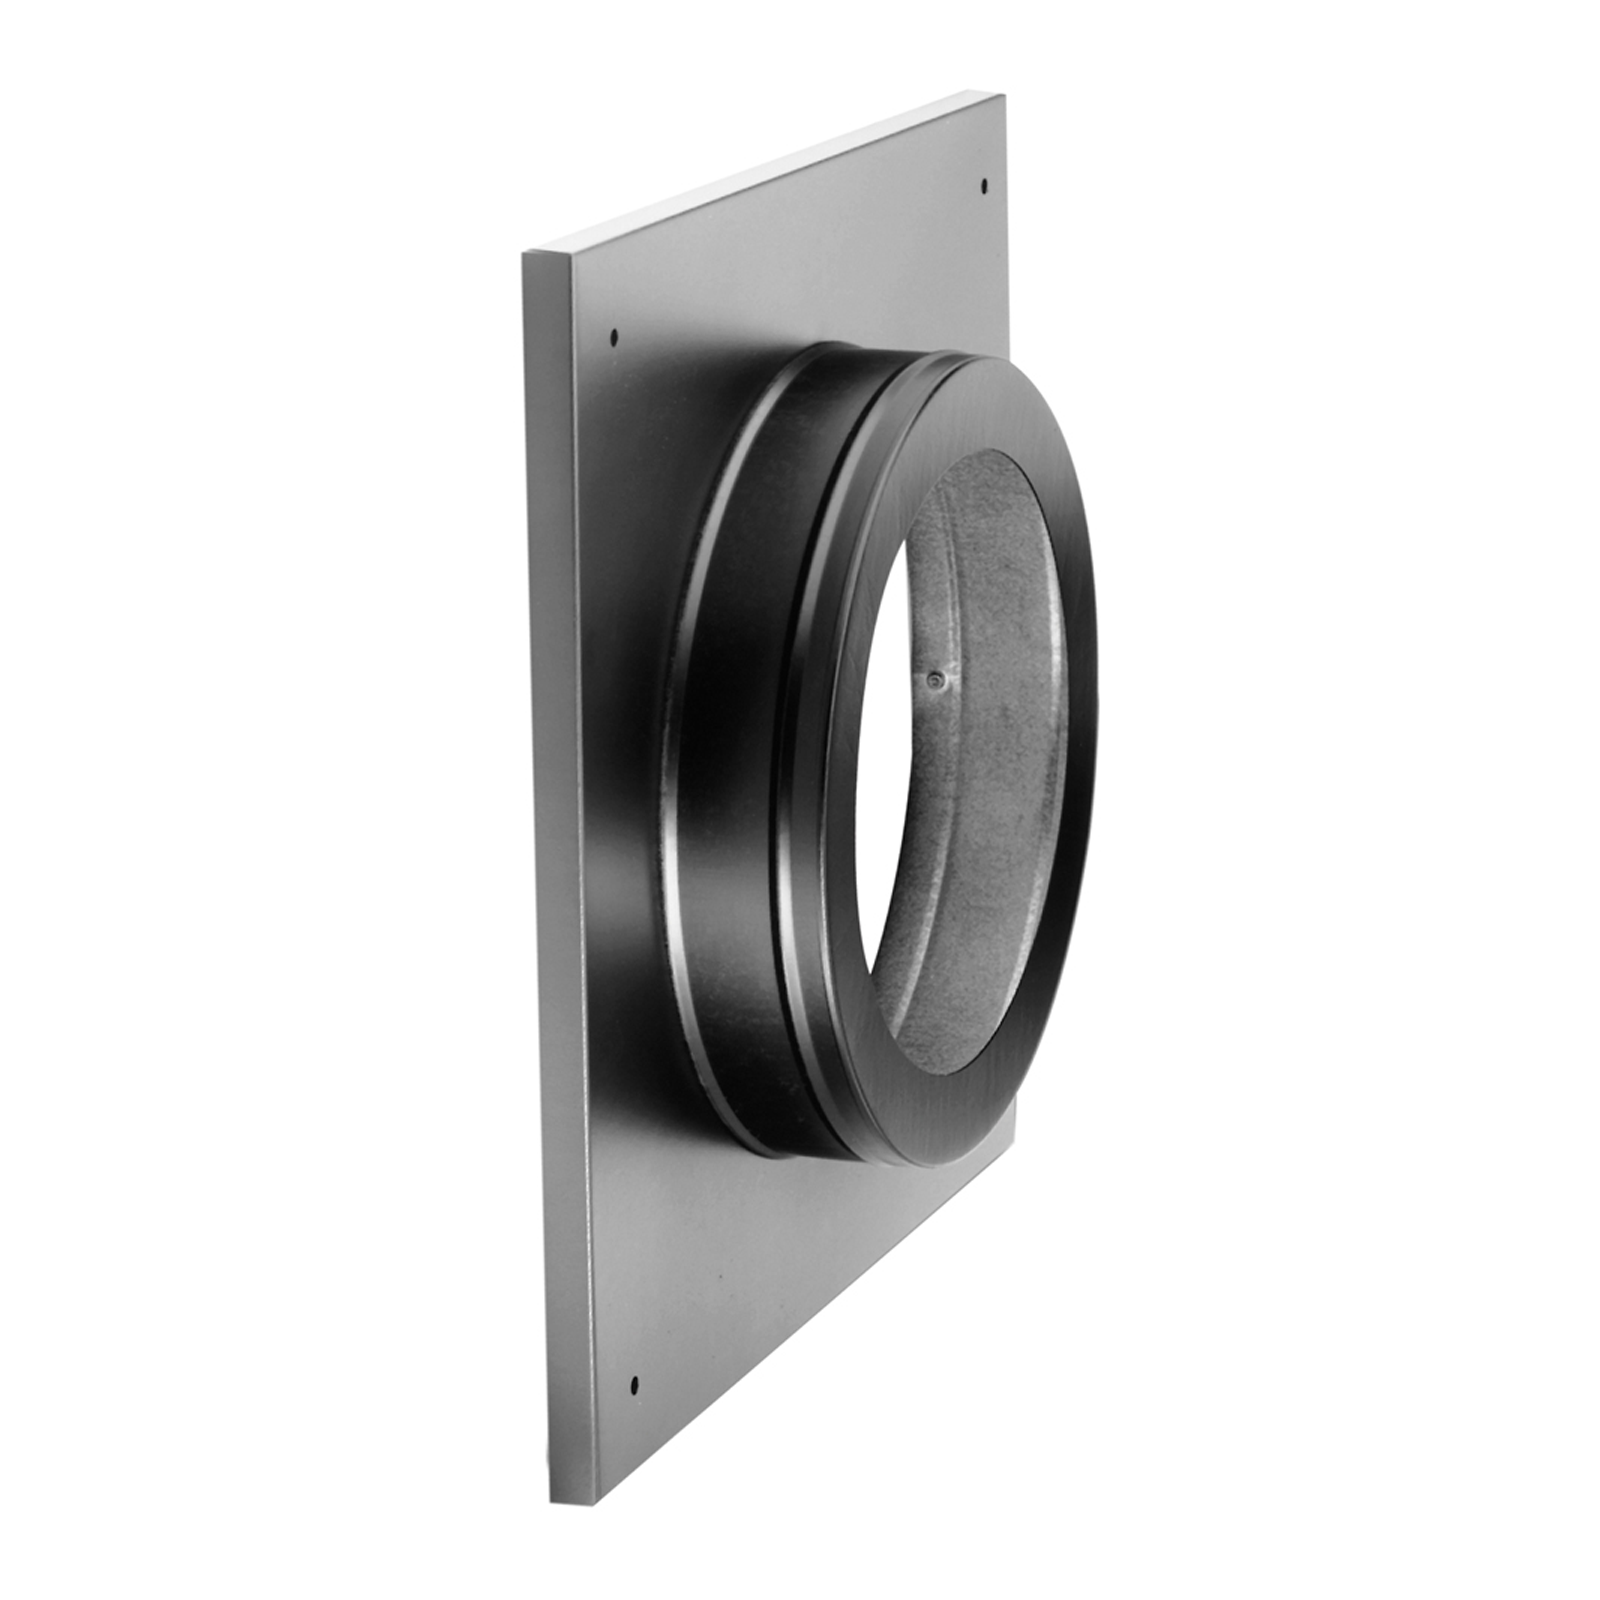 DuraVent DVP Round Ceiling Support / Wall Thimble | 46DVA-DC